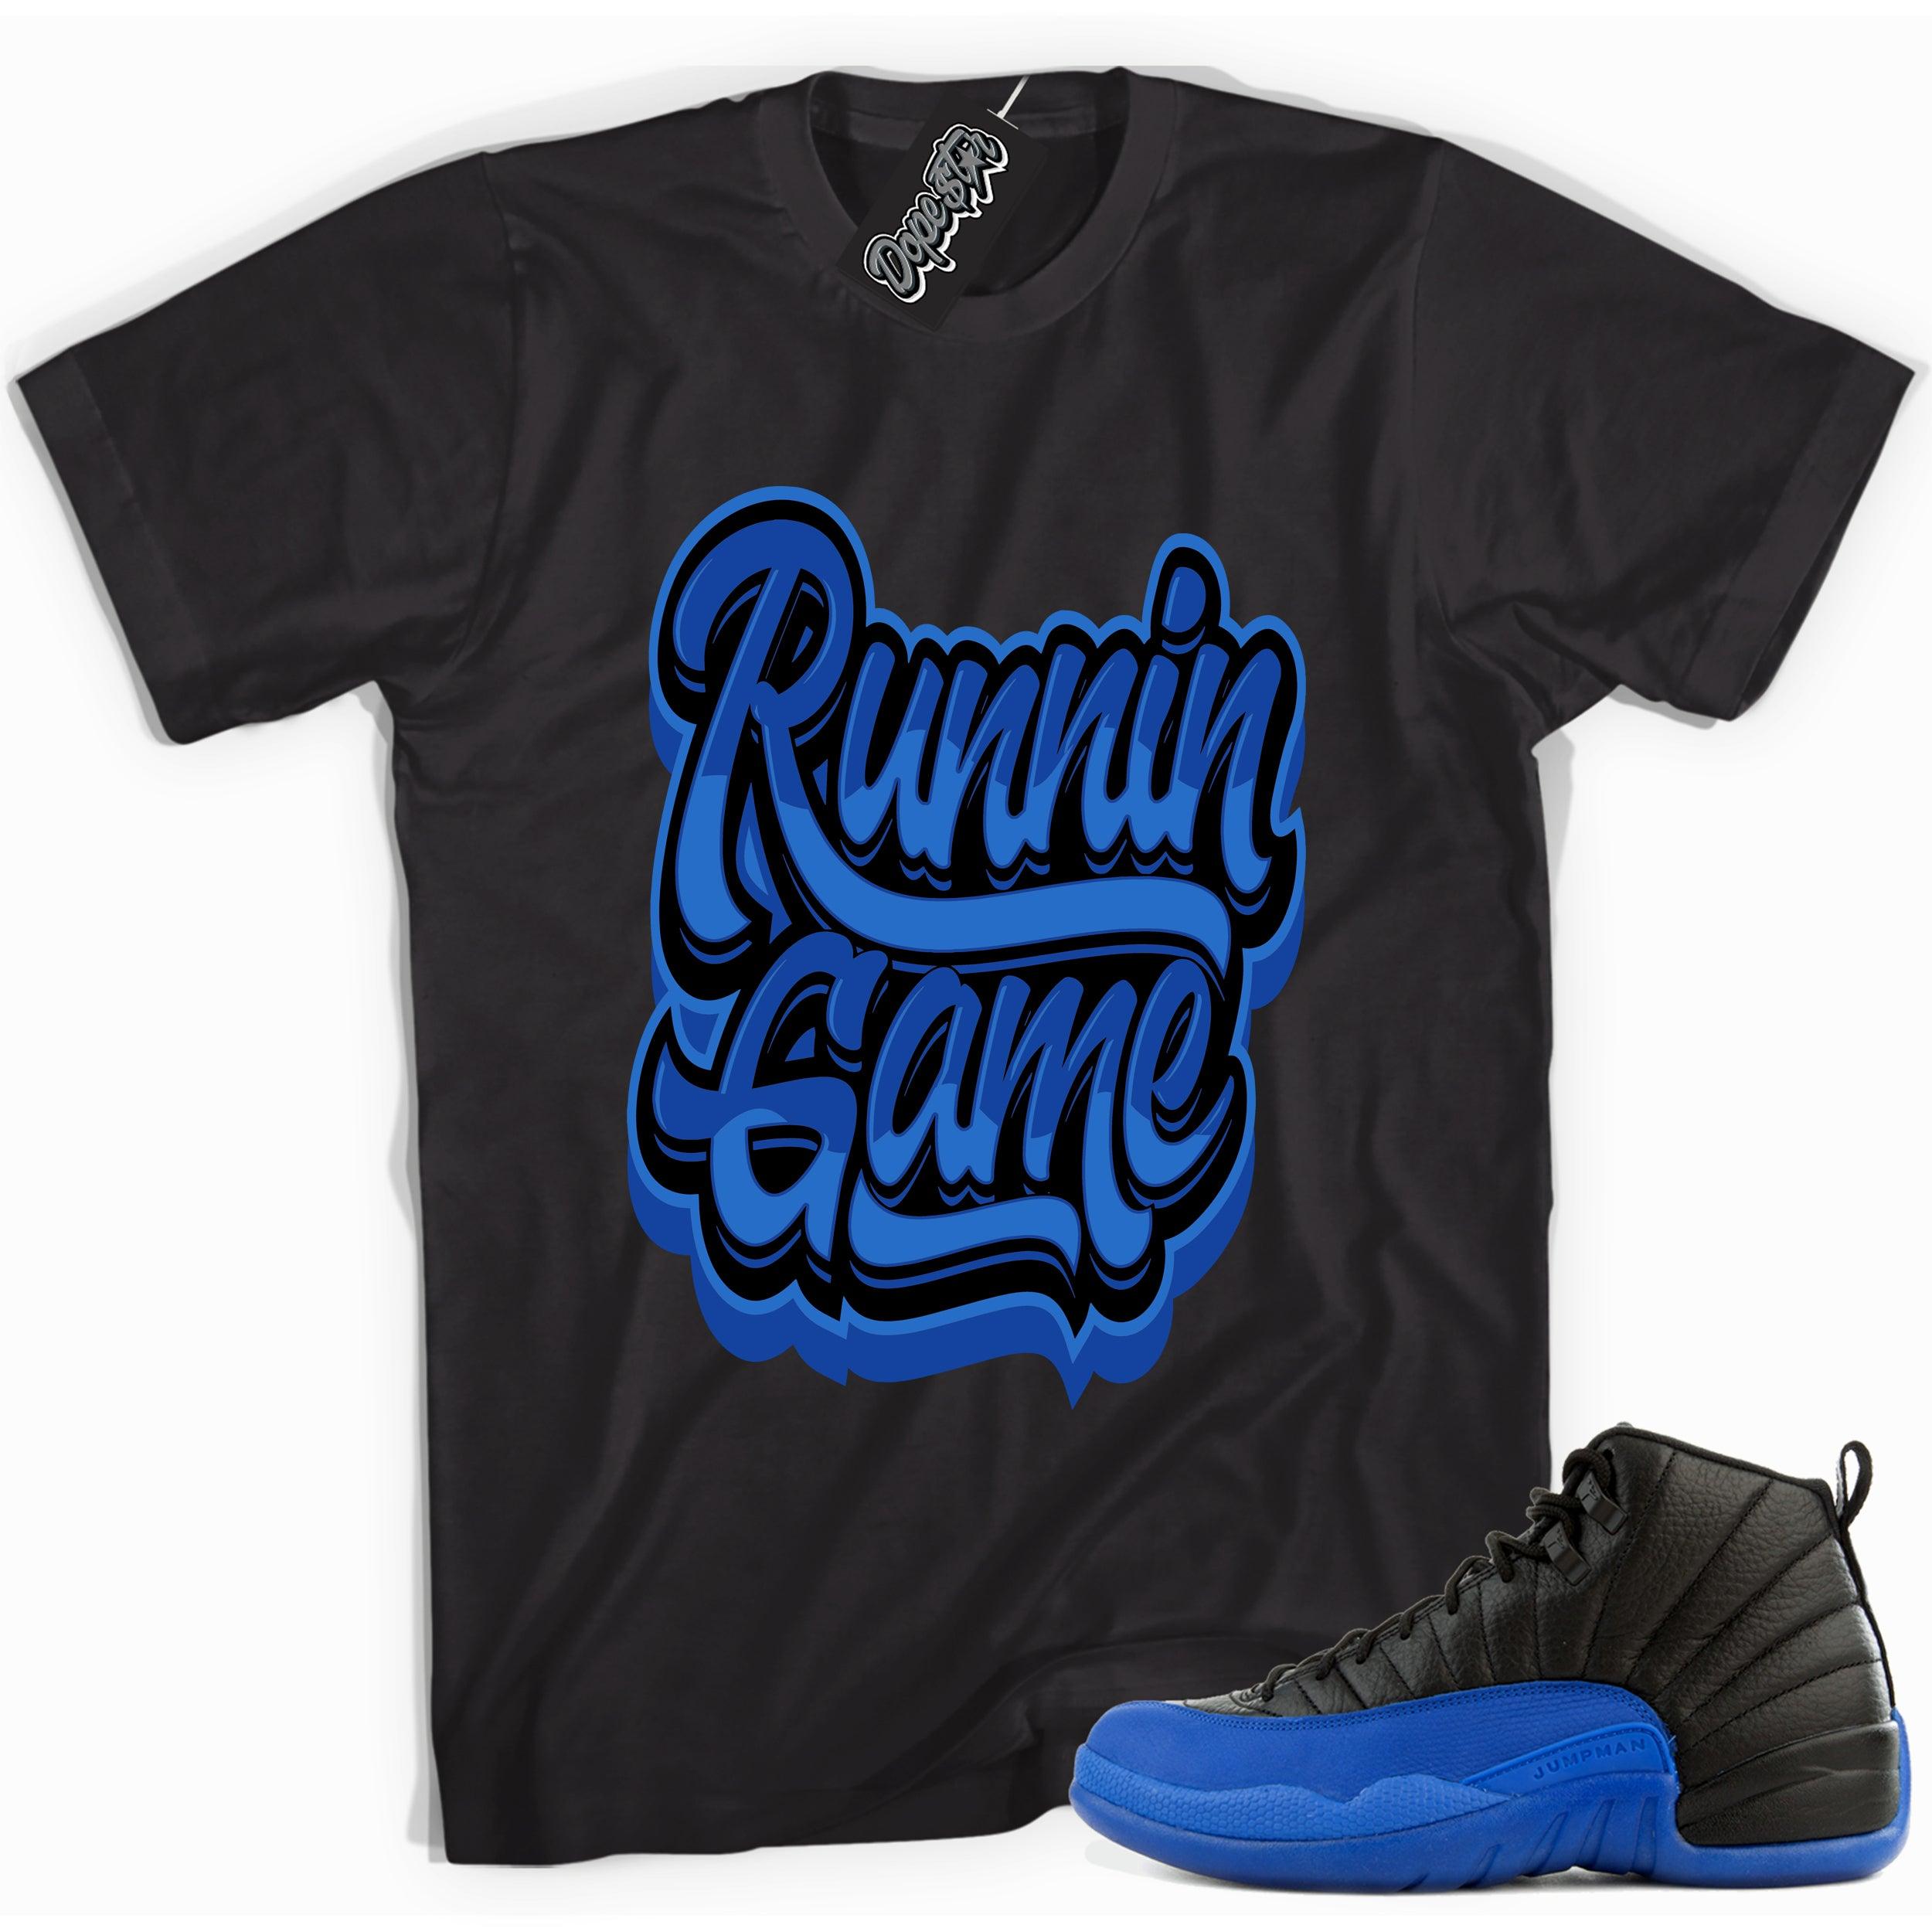 Cool black graphic tee with 'running game' print, that perfectly matches  Air Jordan 12 Retro Black Game Royal sneakers.